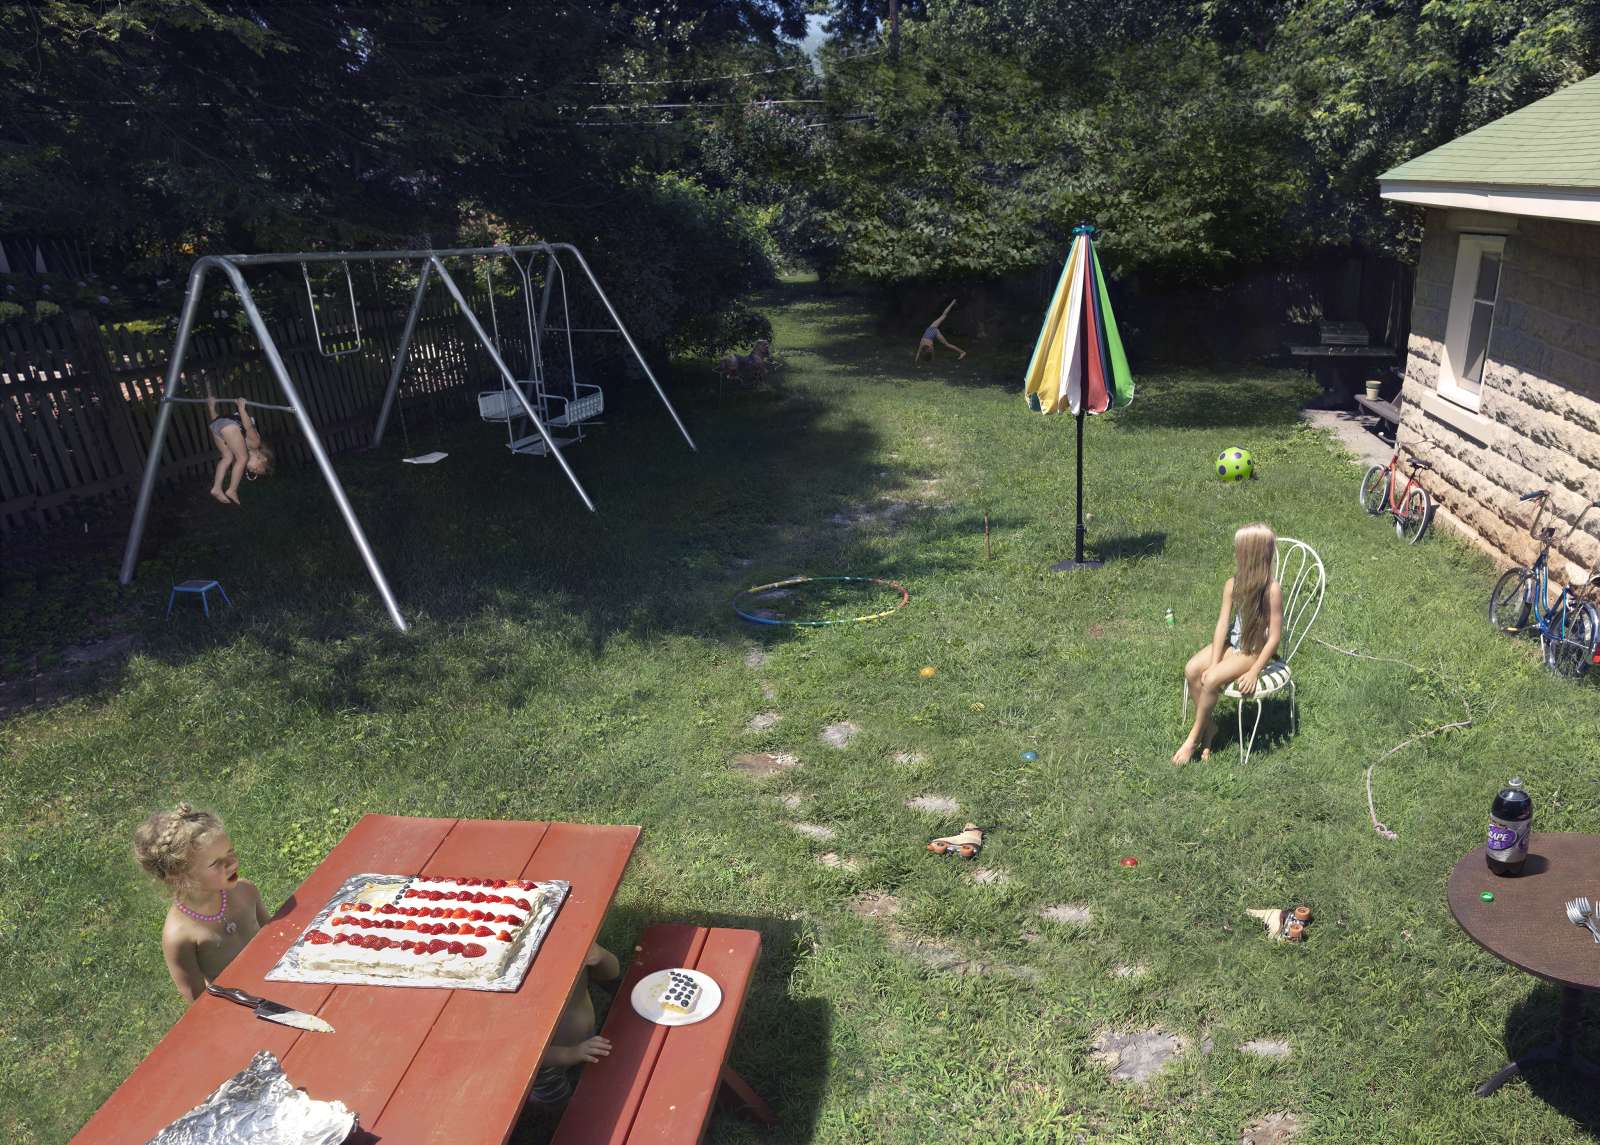 Julie Blackmon's surreal photos capture daily life in American suburbs 